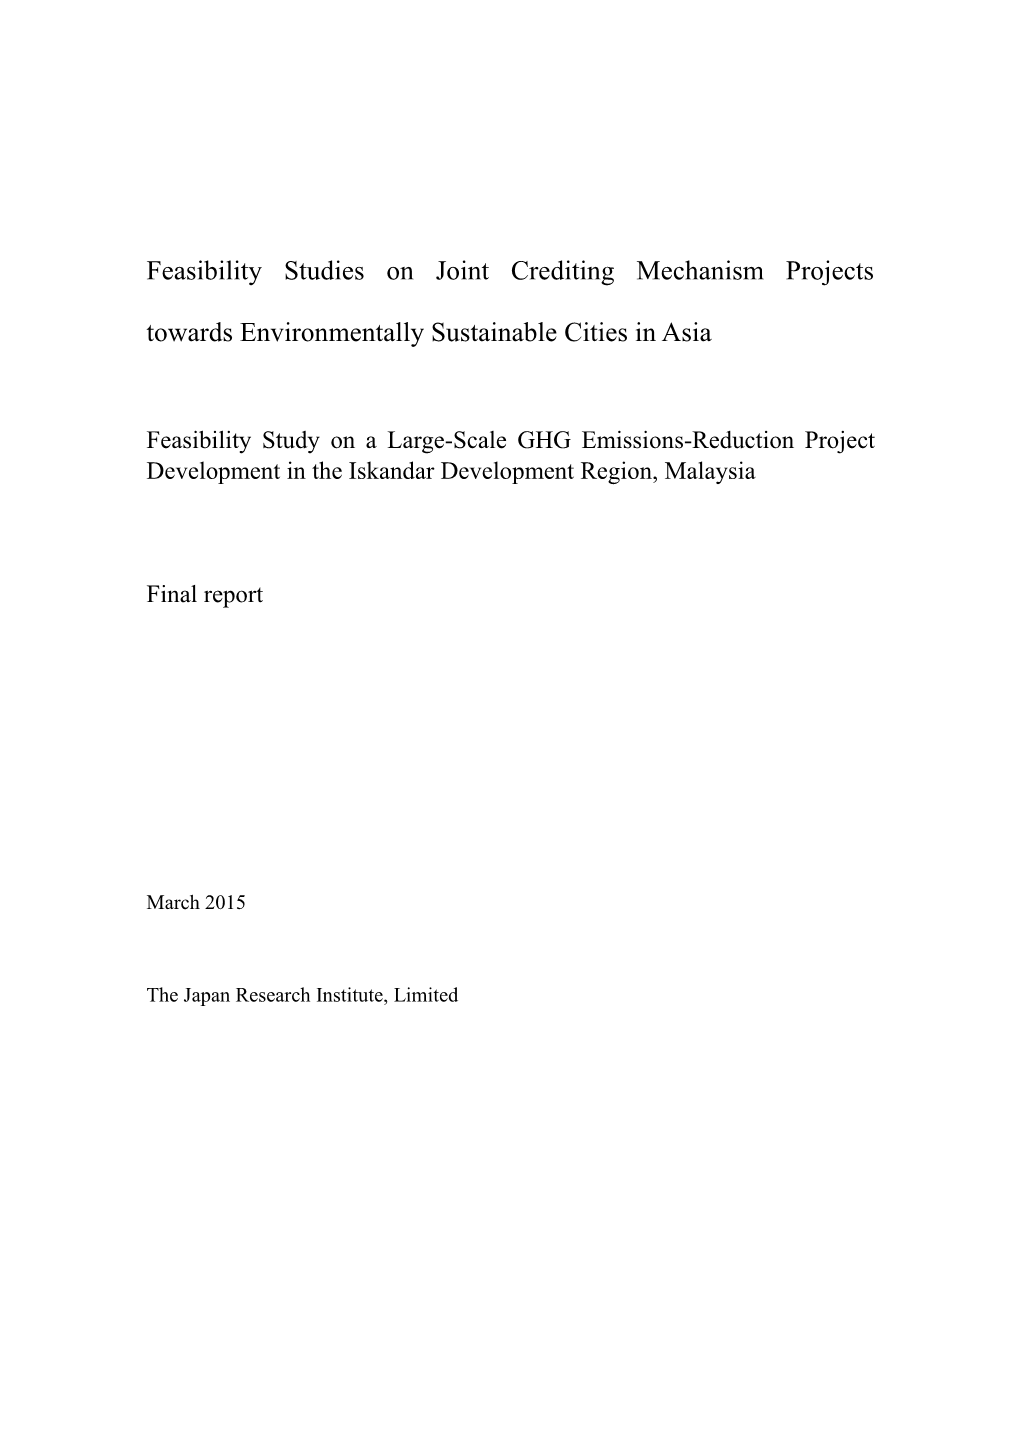 Feasibility Studies on Joint Crediting Mechanism Projects Towards Environmentally Sustainable Cities in Asia